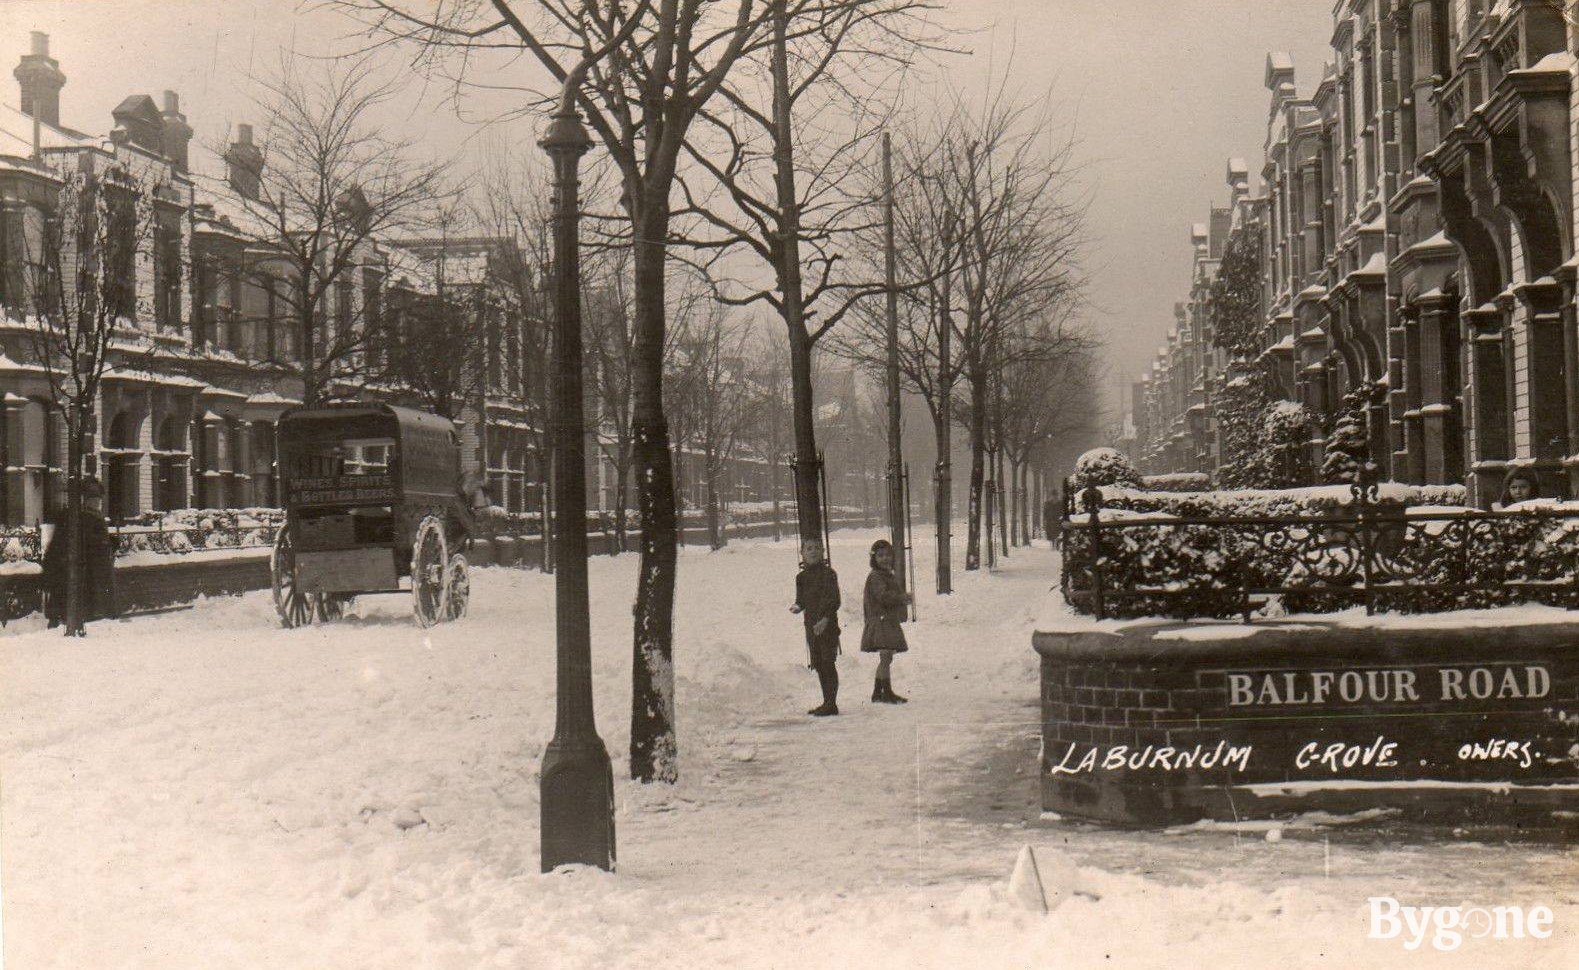 Laburnum Grove - Junction with Balfour Road in the snow